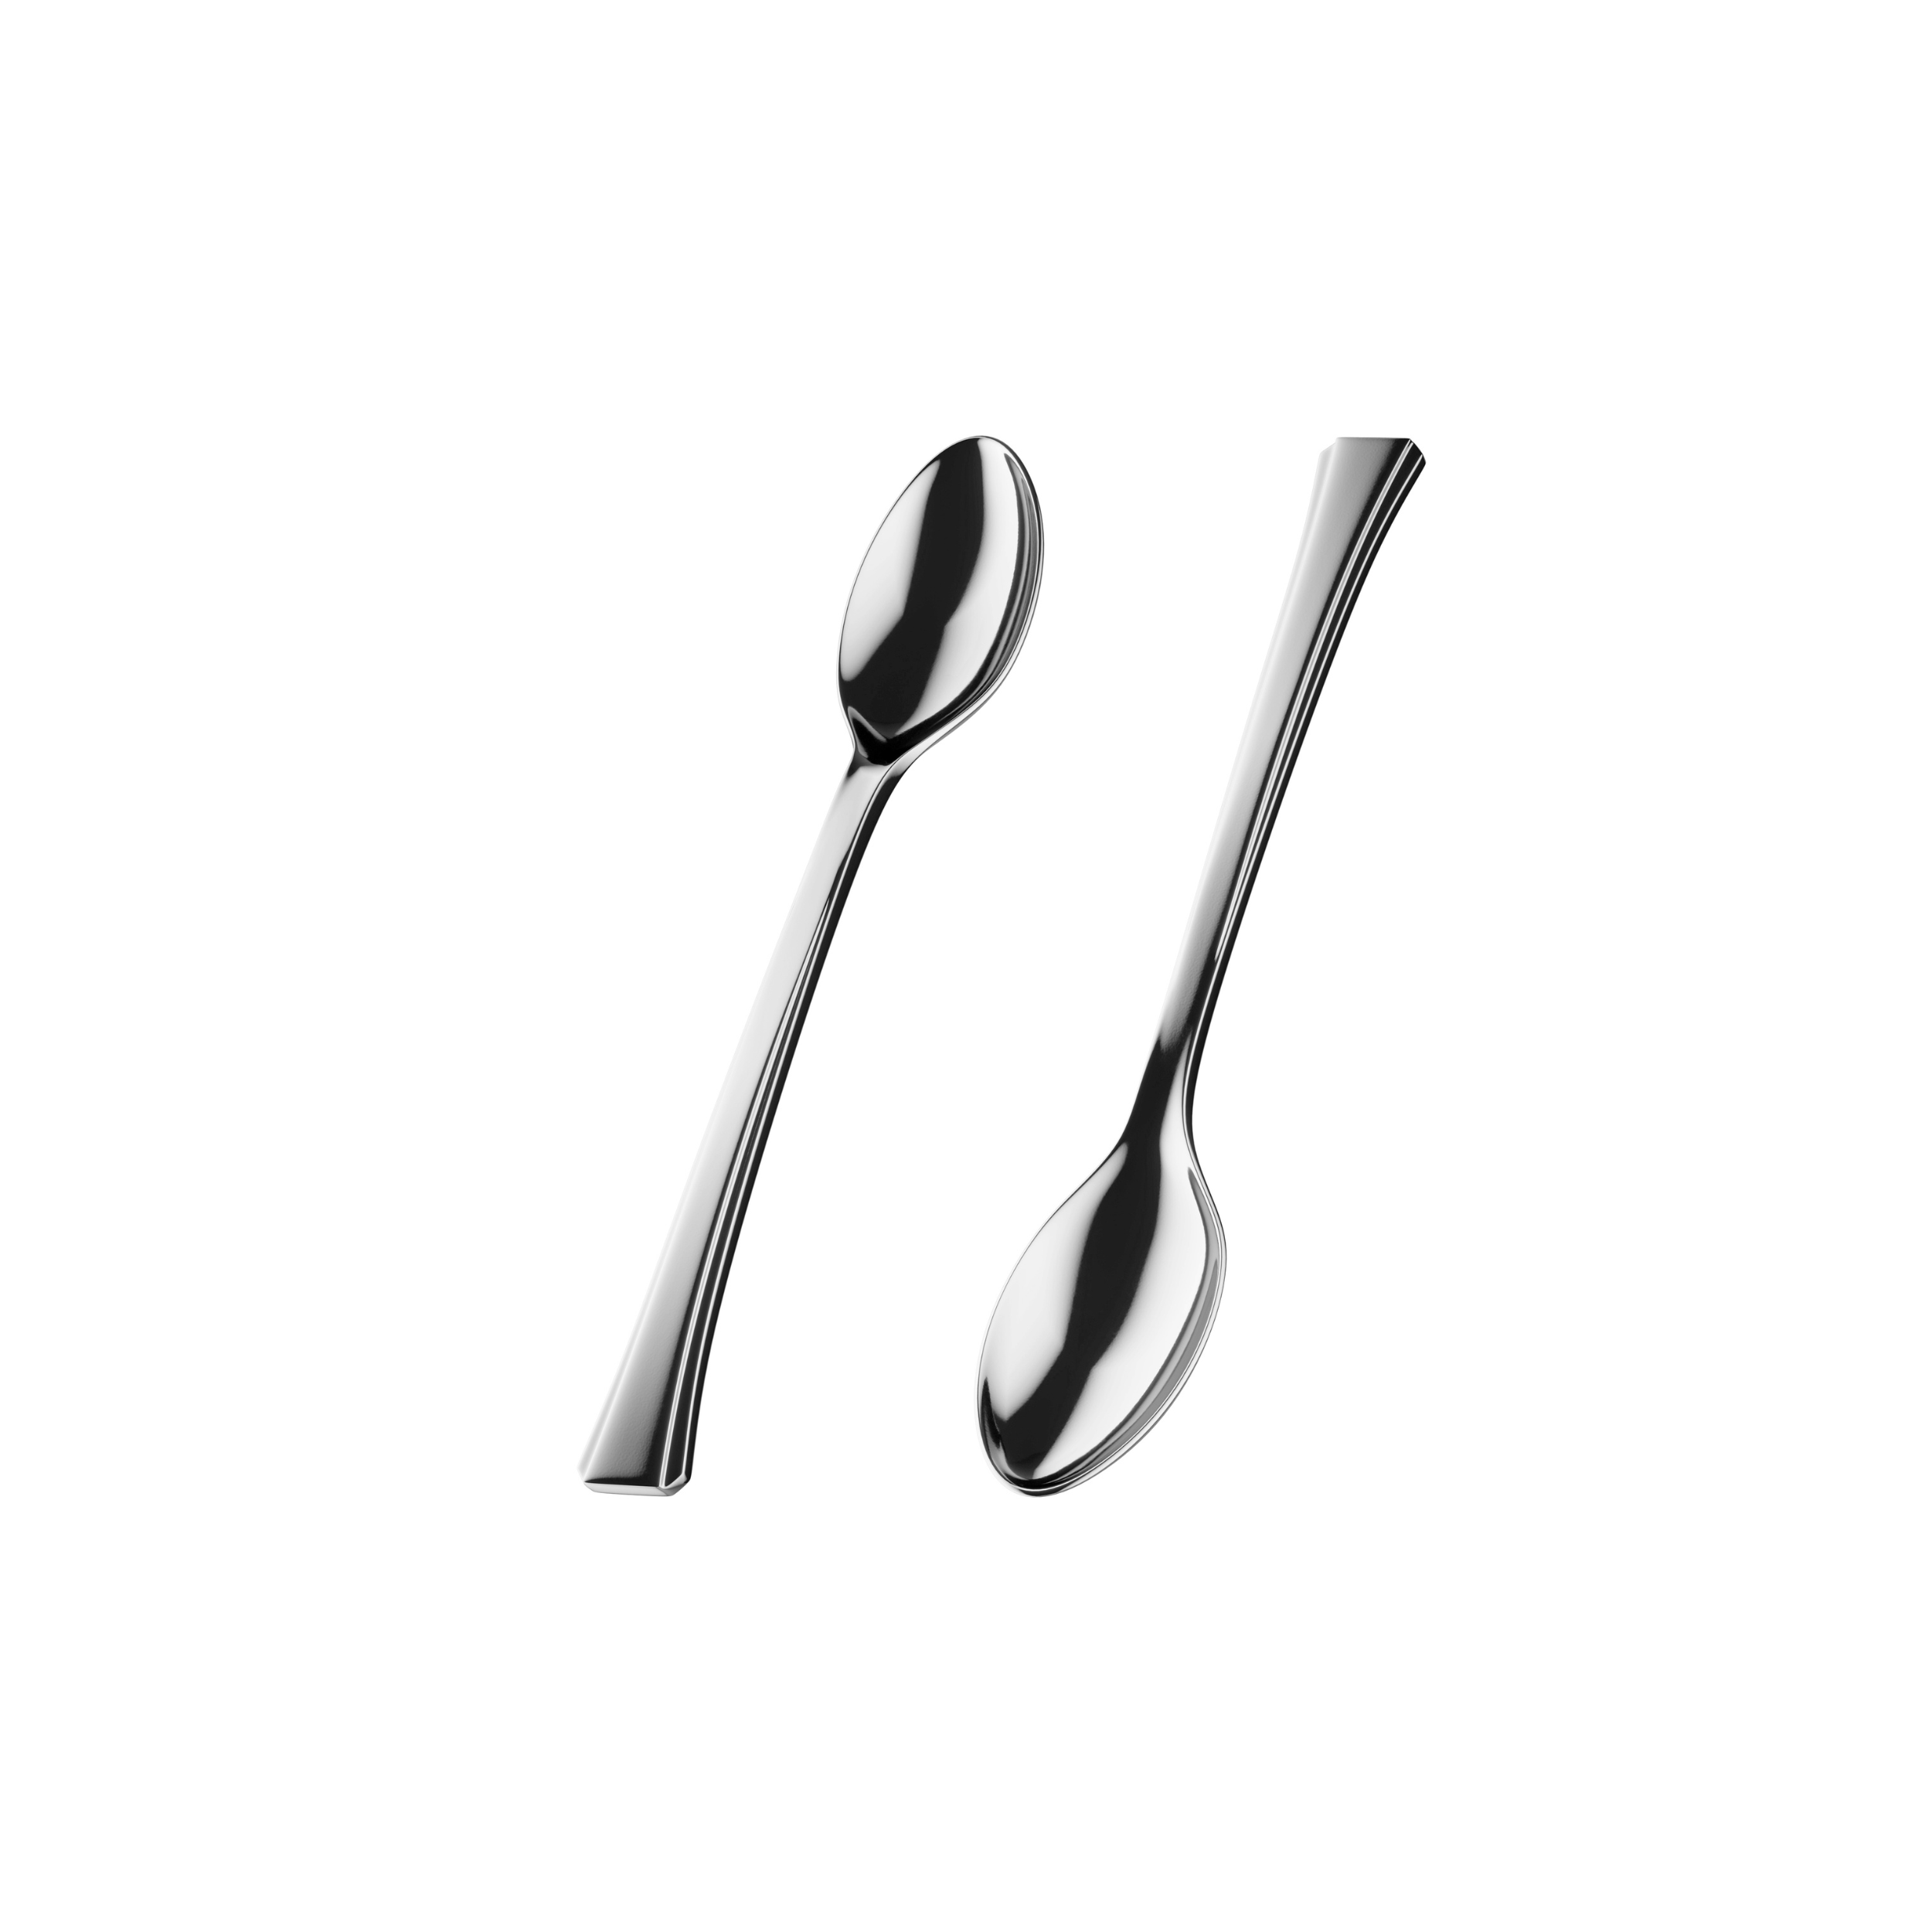 Exquisite Silver Tasting Spoons | 500 Count